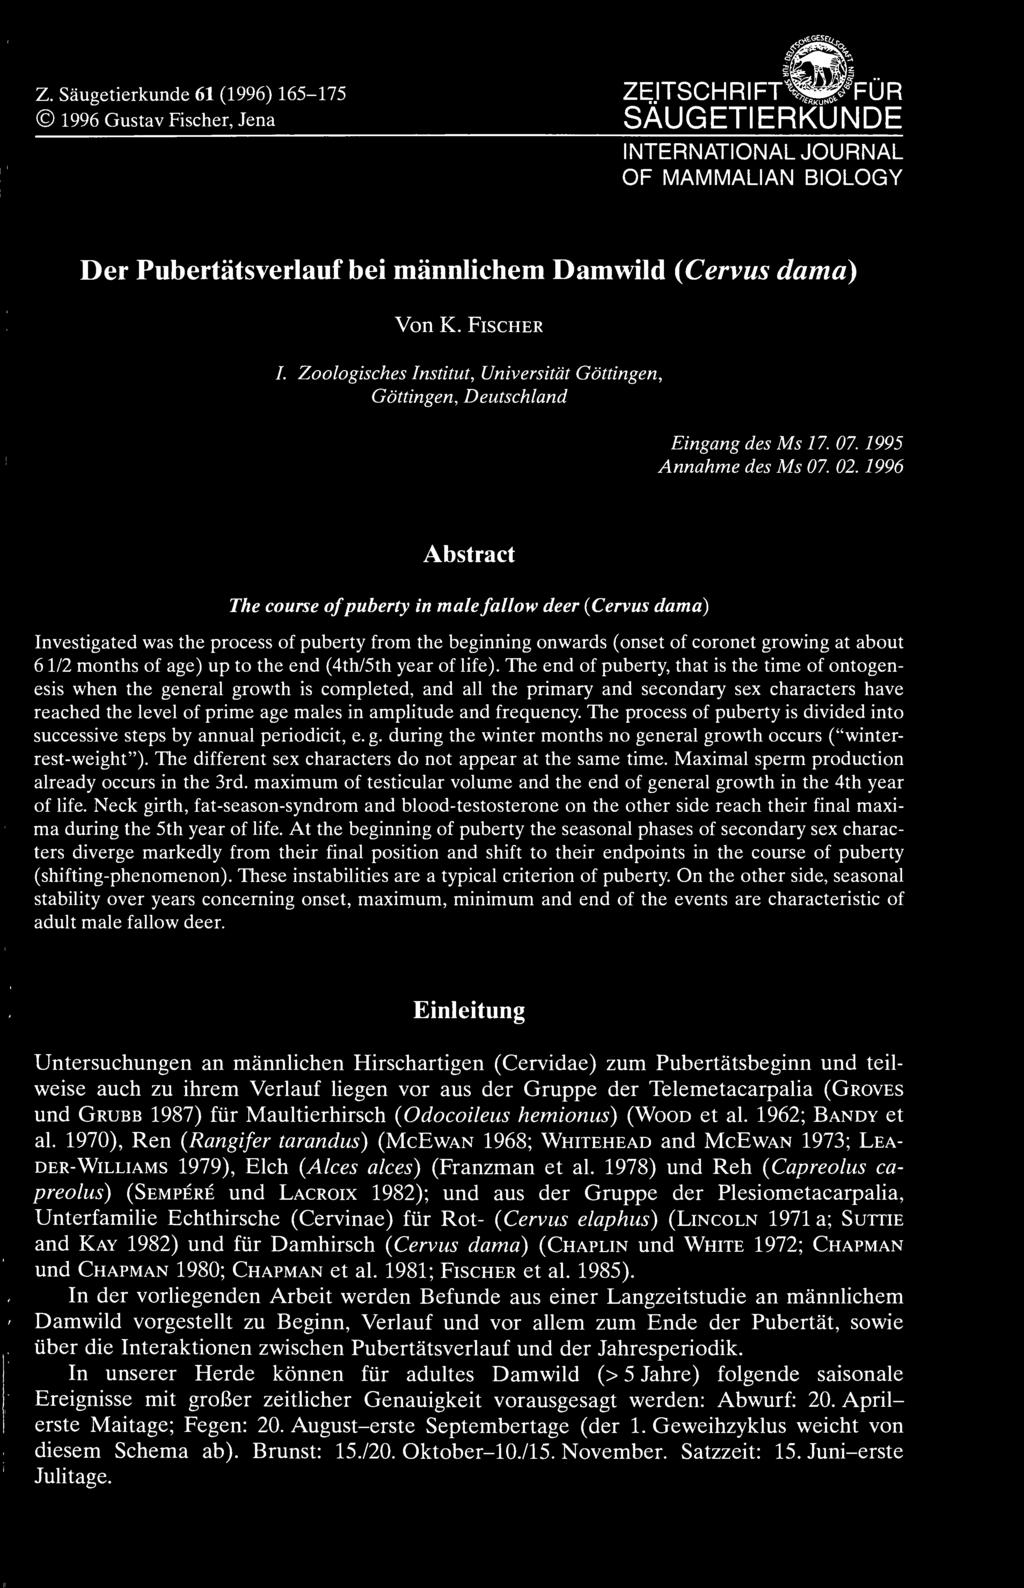 1996 Abstract The course ofpuberty in malefallow deer {Cervus dama) Investigated was the process of puberty from the beginning onwards (onset of Coronet growing at about 6 1/2 months of age) up to